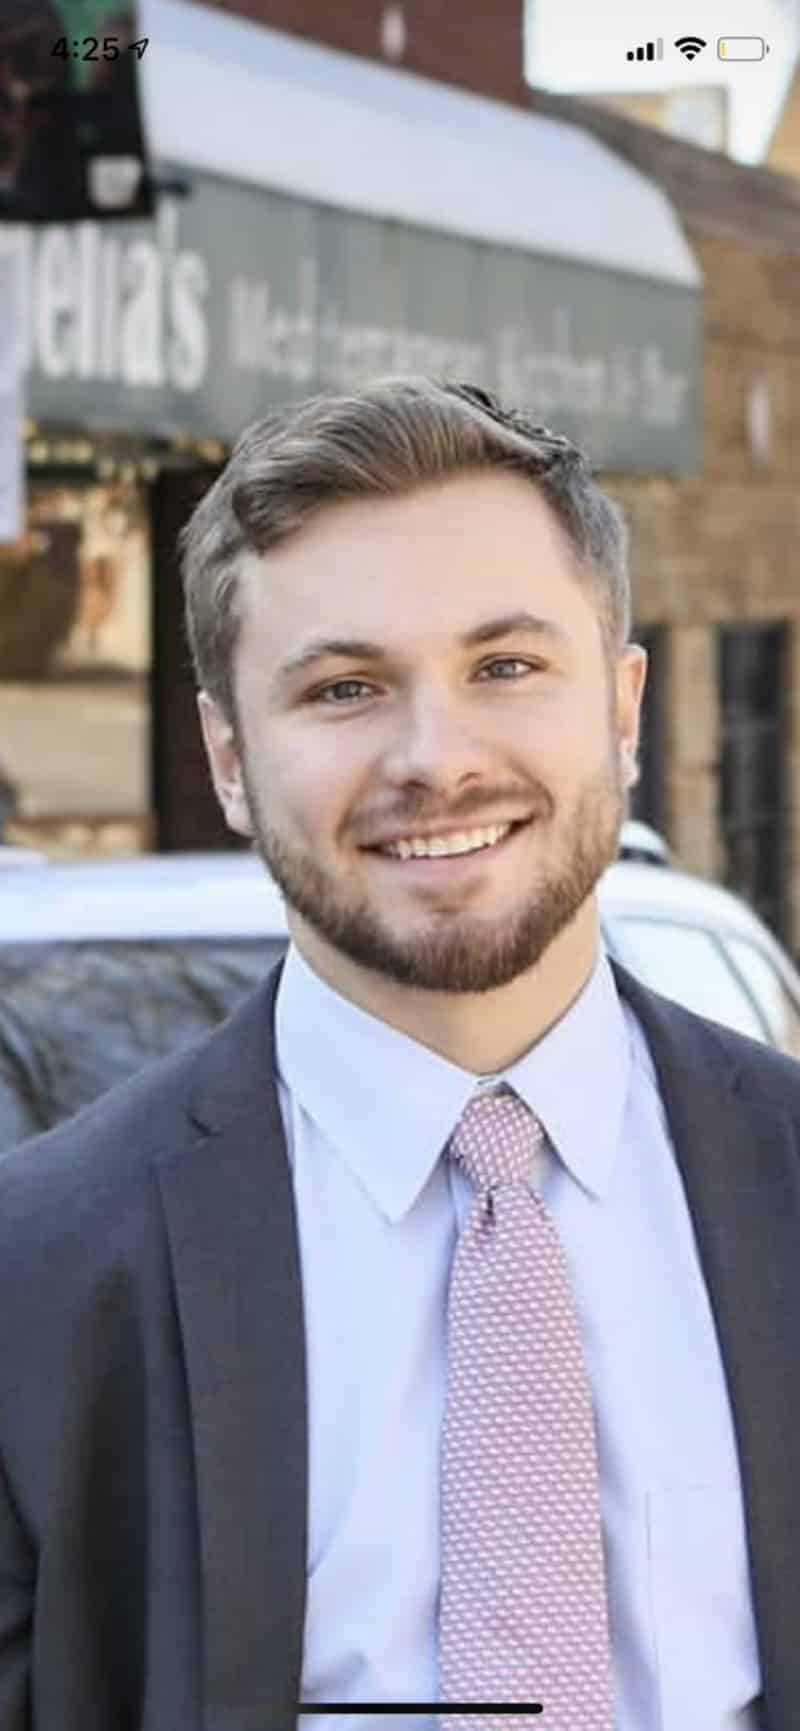 A woman in Texas has taken to Twitter to expose a man, now identified as Luke Luechtefeld, who allegedly touched her without consent in public after pulling down her outfit as she walked out of a bar with a group of friends last week.